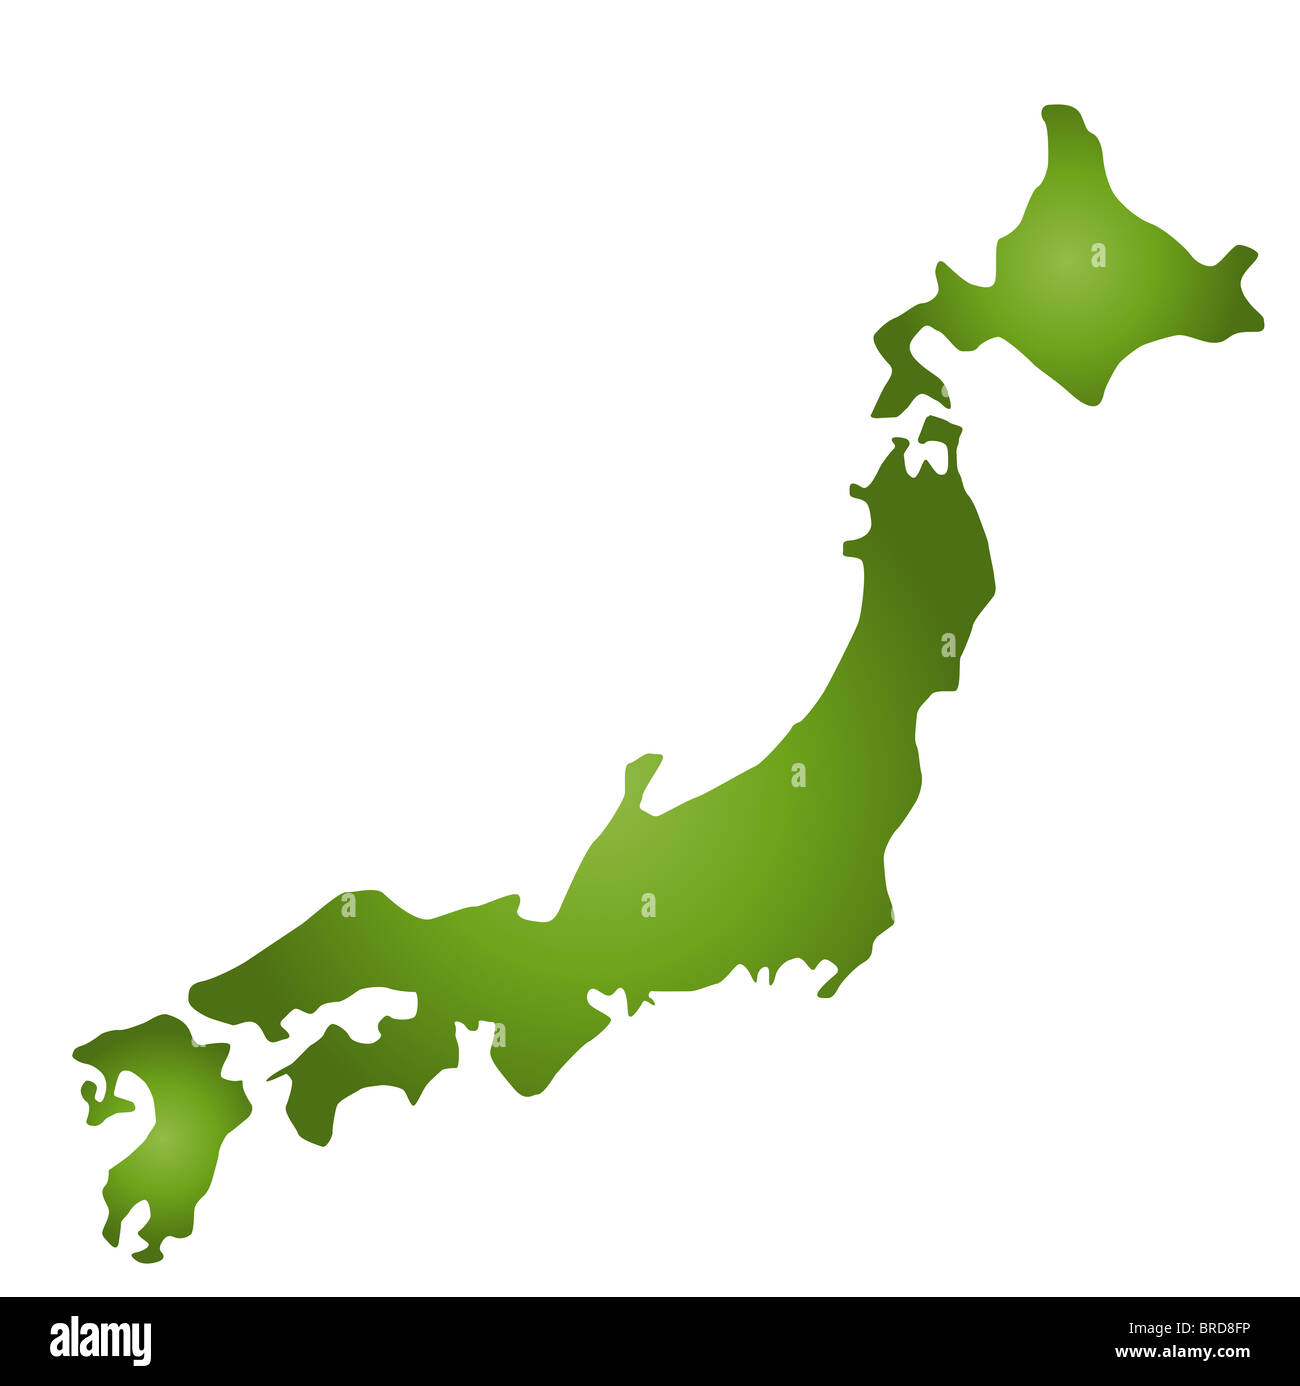 A stylized map of Japan in green tone. All isolated on white background. Stock Photo